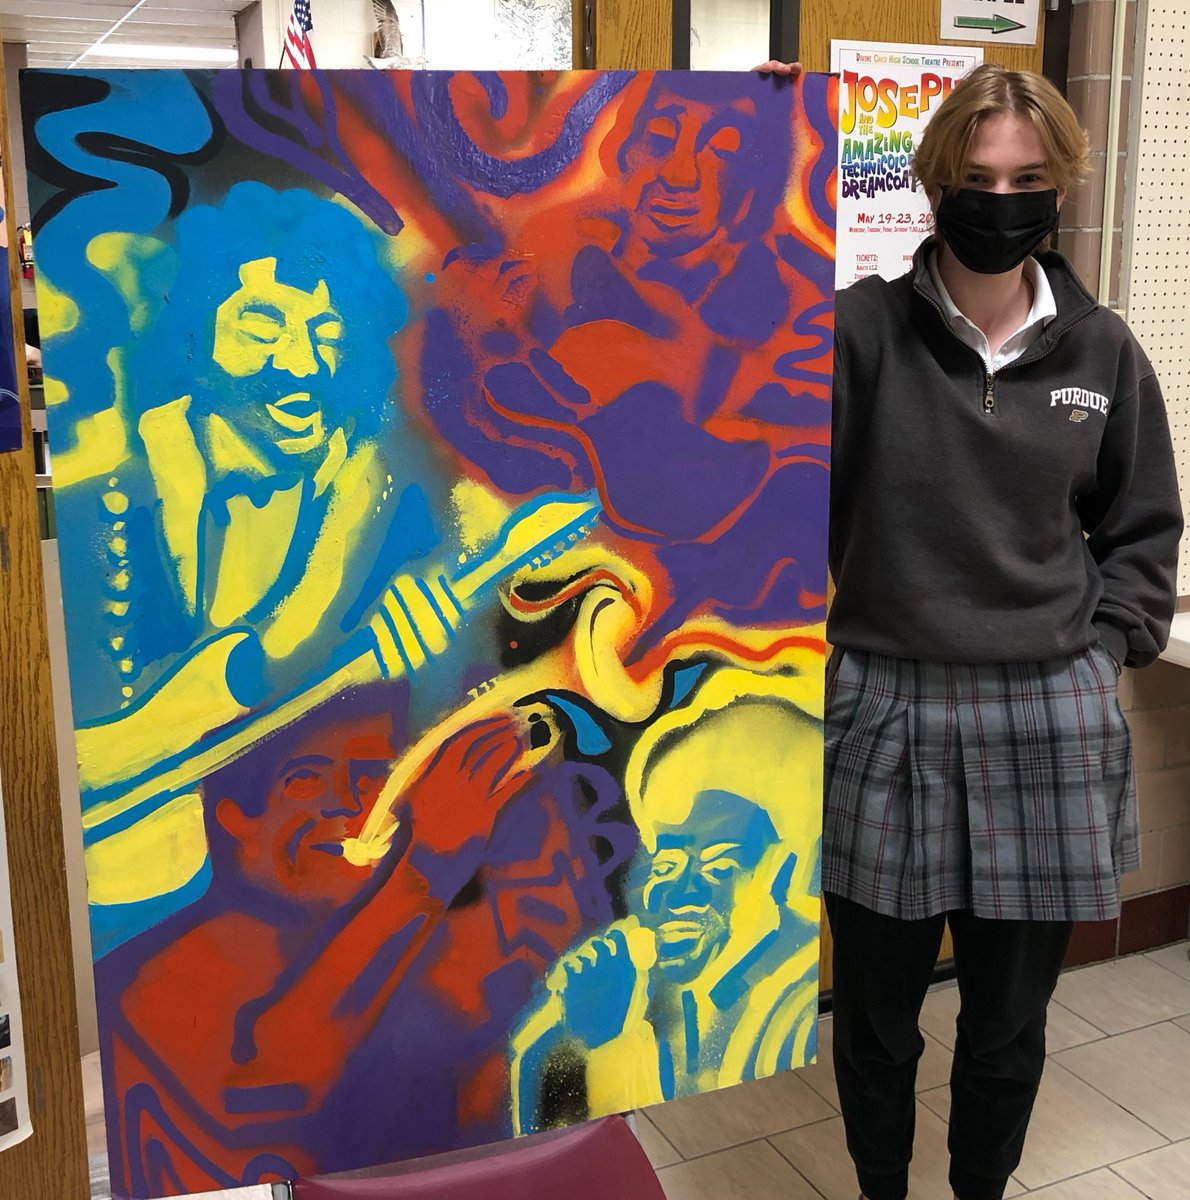 Congratulations to Maggie Watts who won 1st place in the inaugural DCHS Black History Month Art Contest! We had a wonderful Black History Month program on our campus this past February. Thank you to everyone who contributed and celebrated with us!